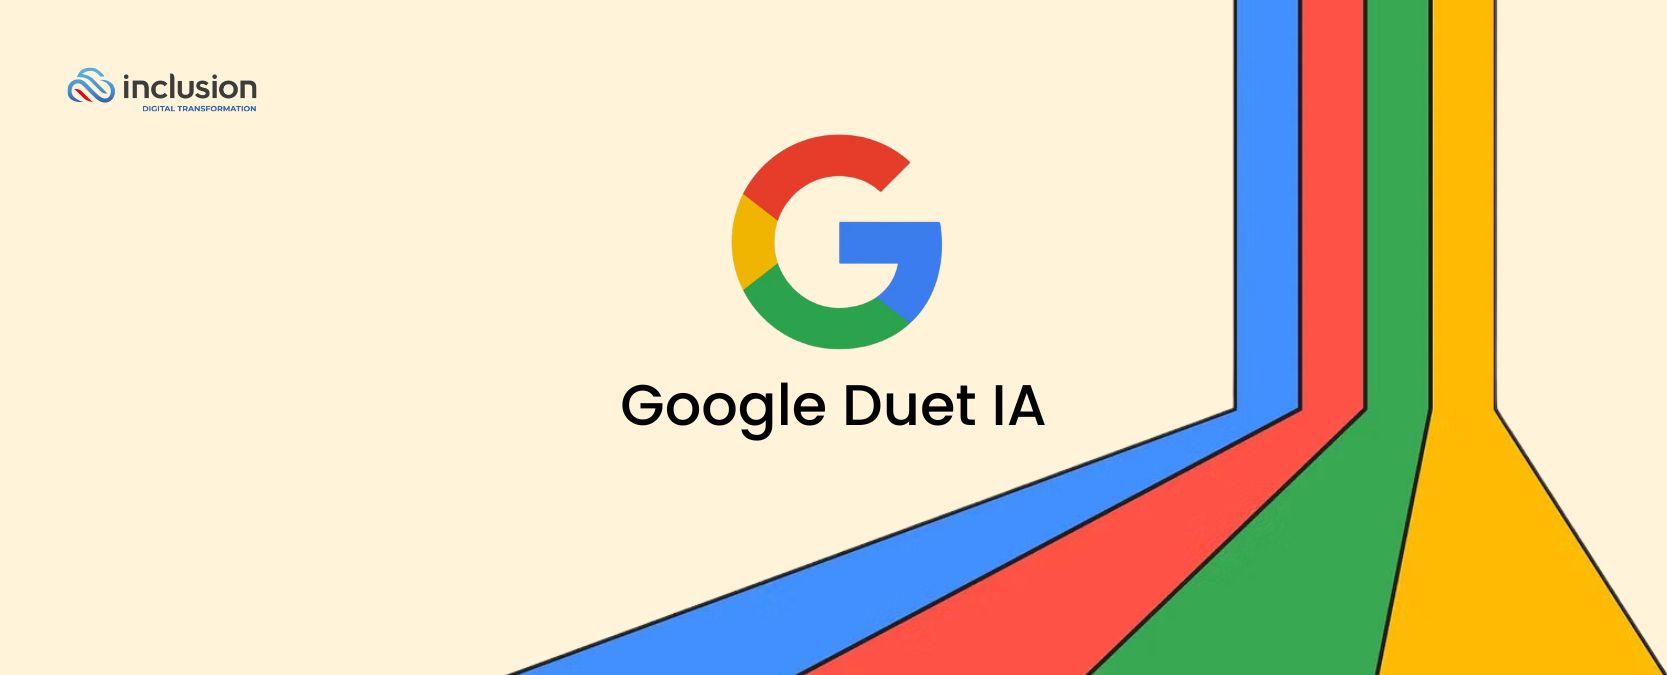 Google Duet AI Streamlined Workflows and Collaboration